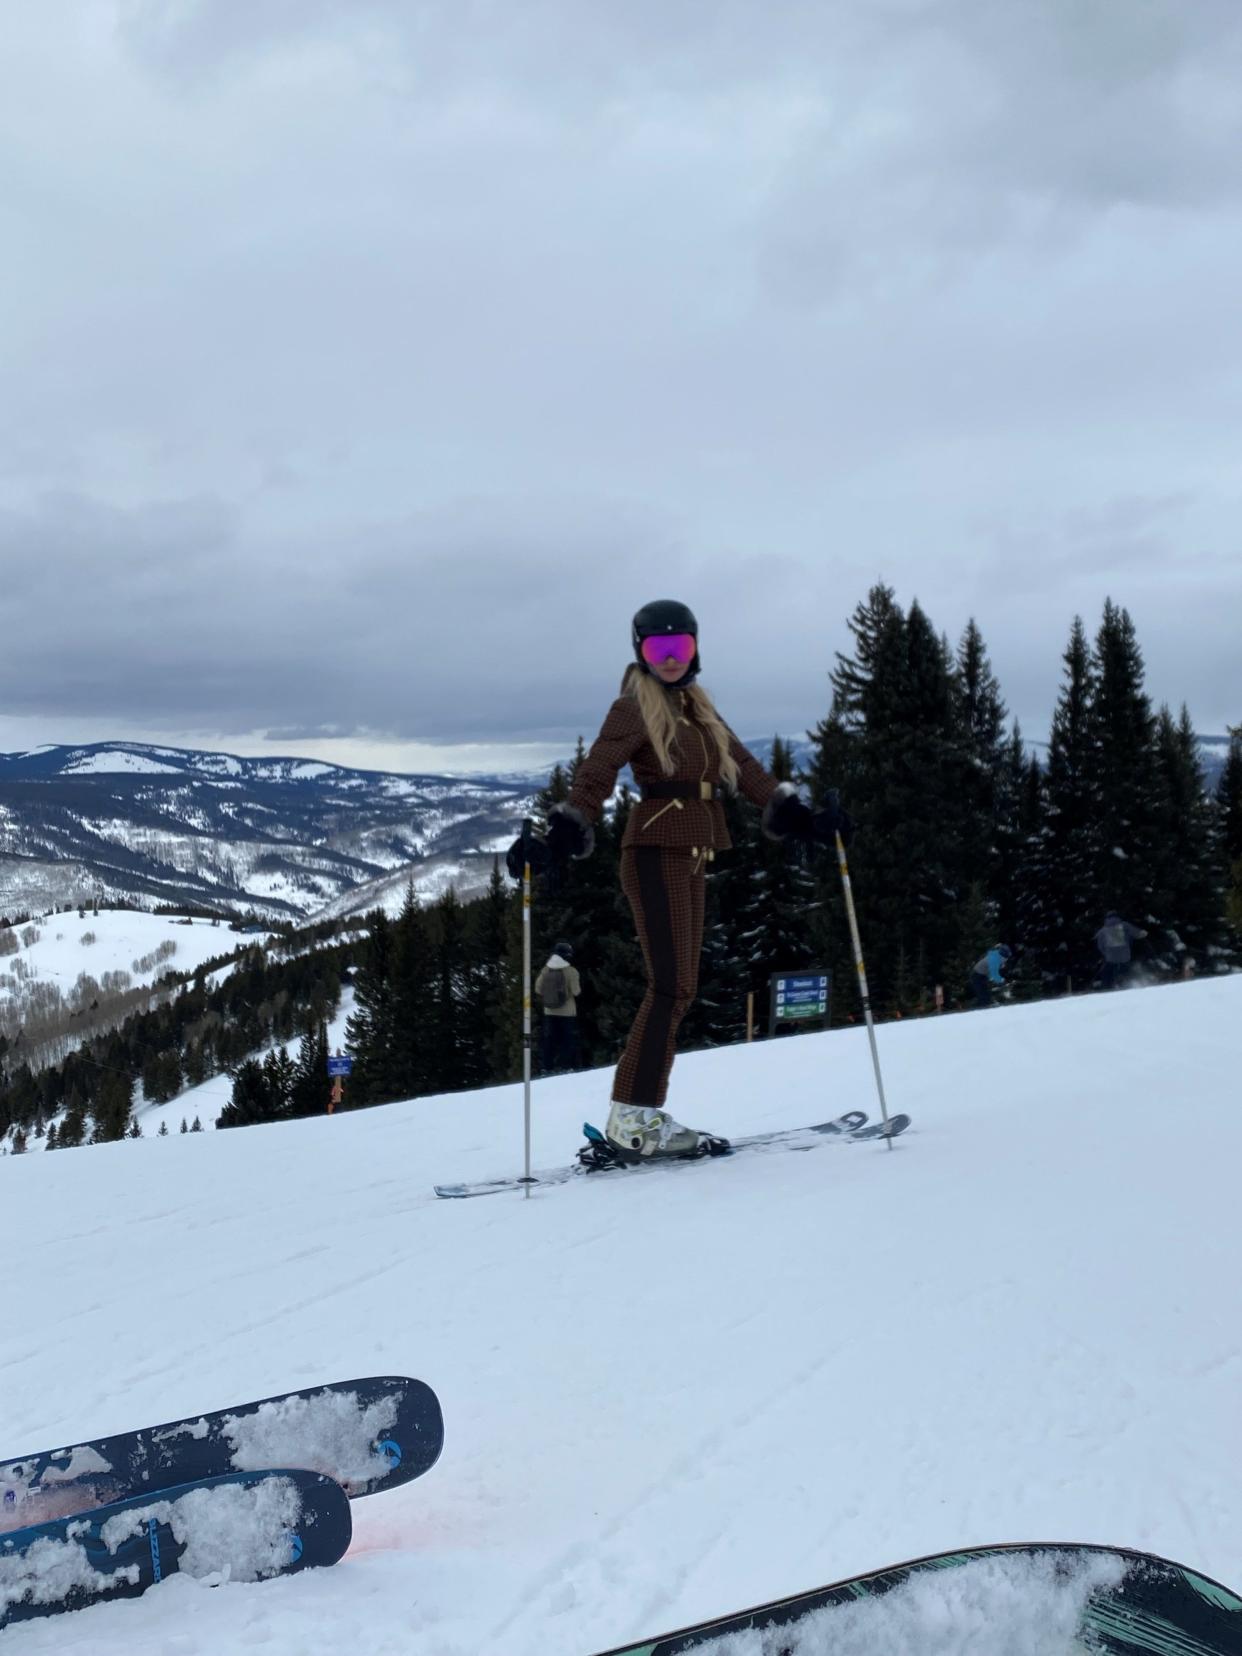 Skiing was one of the activities that bunion pain prevented Maggie Bradley from enjoying until she underwent Lapiplasty 3D Bunion Correction in 2021.